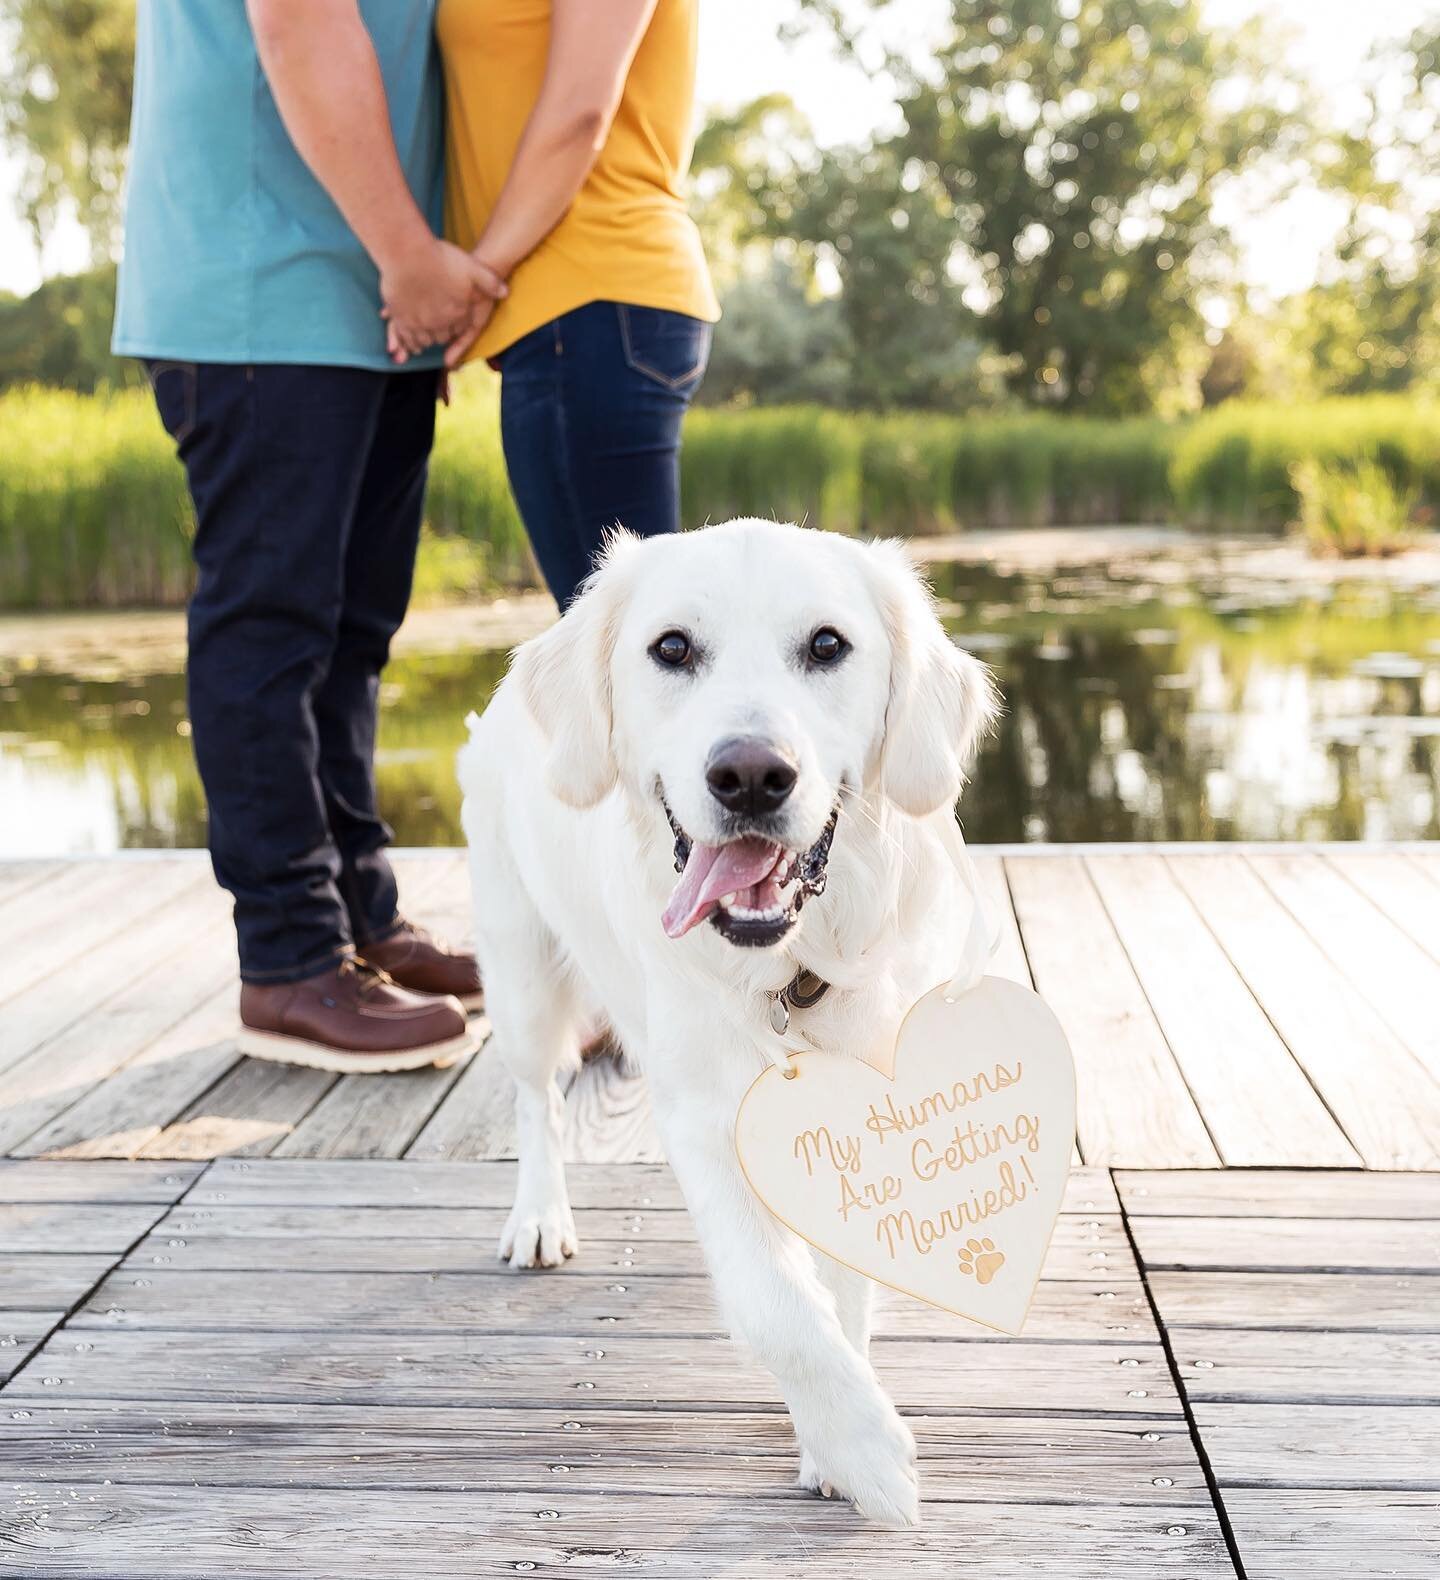 Happy #nationalpuppyday to all the amazing pups out there! It&rsquo;s no secret that we love dogs around here &mdash; so if you&rsquo;re ever on the fence about including them in your engagement or wedding photos...just know that my vote will always 